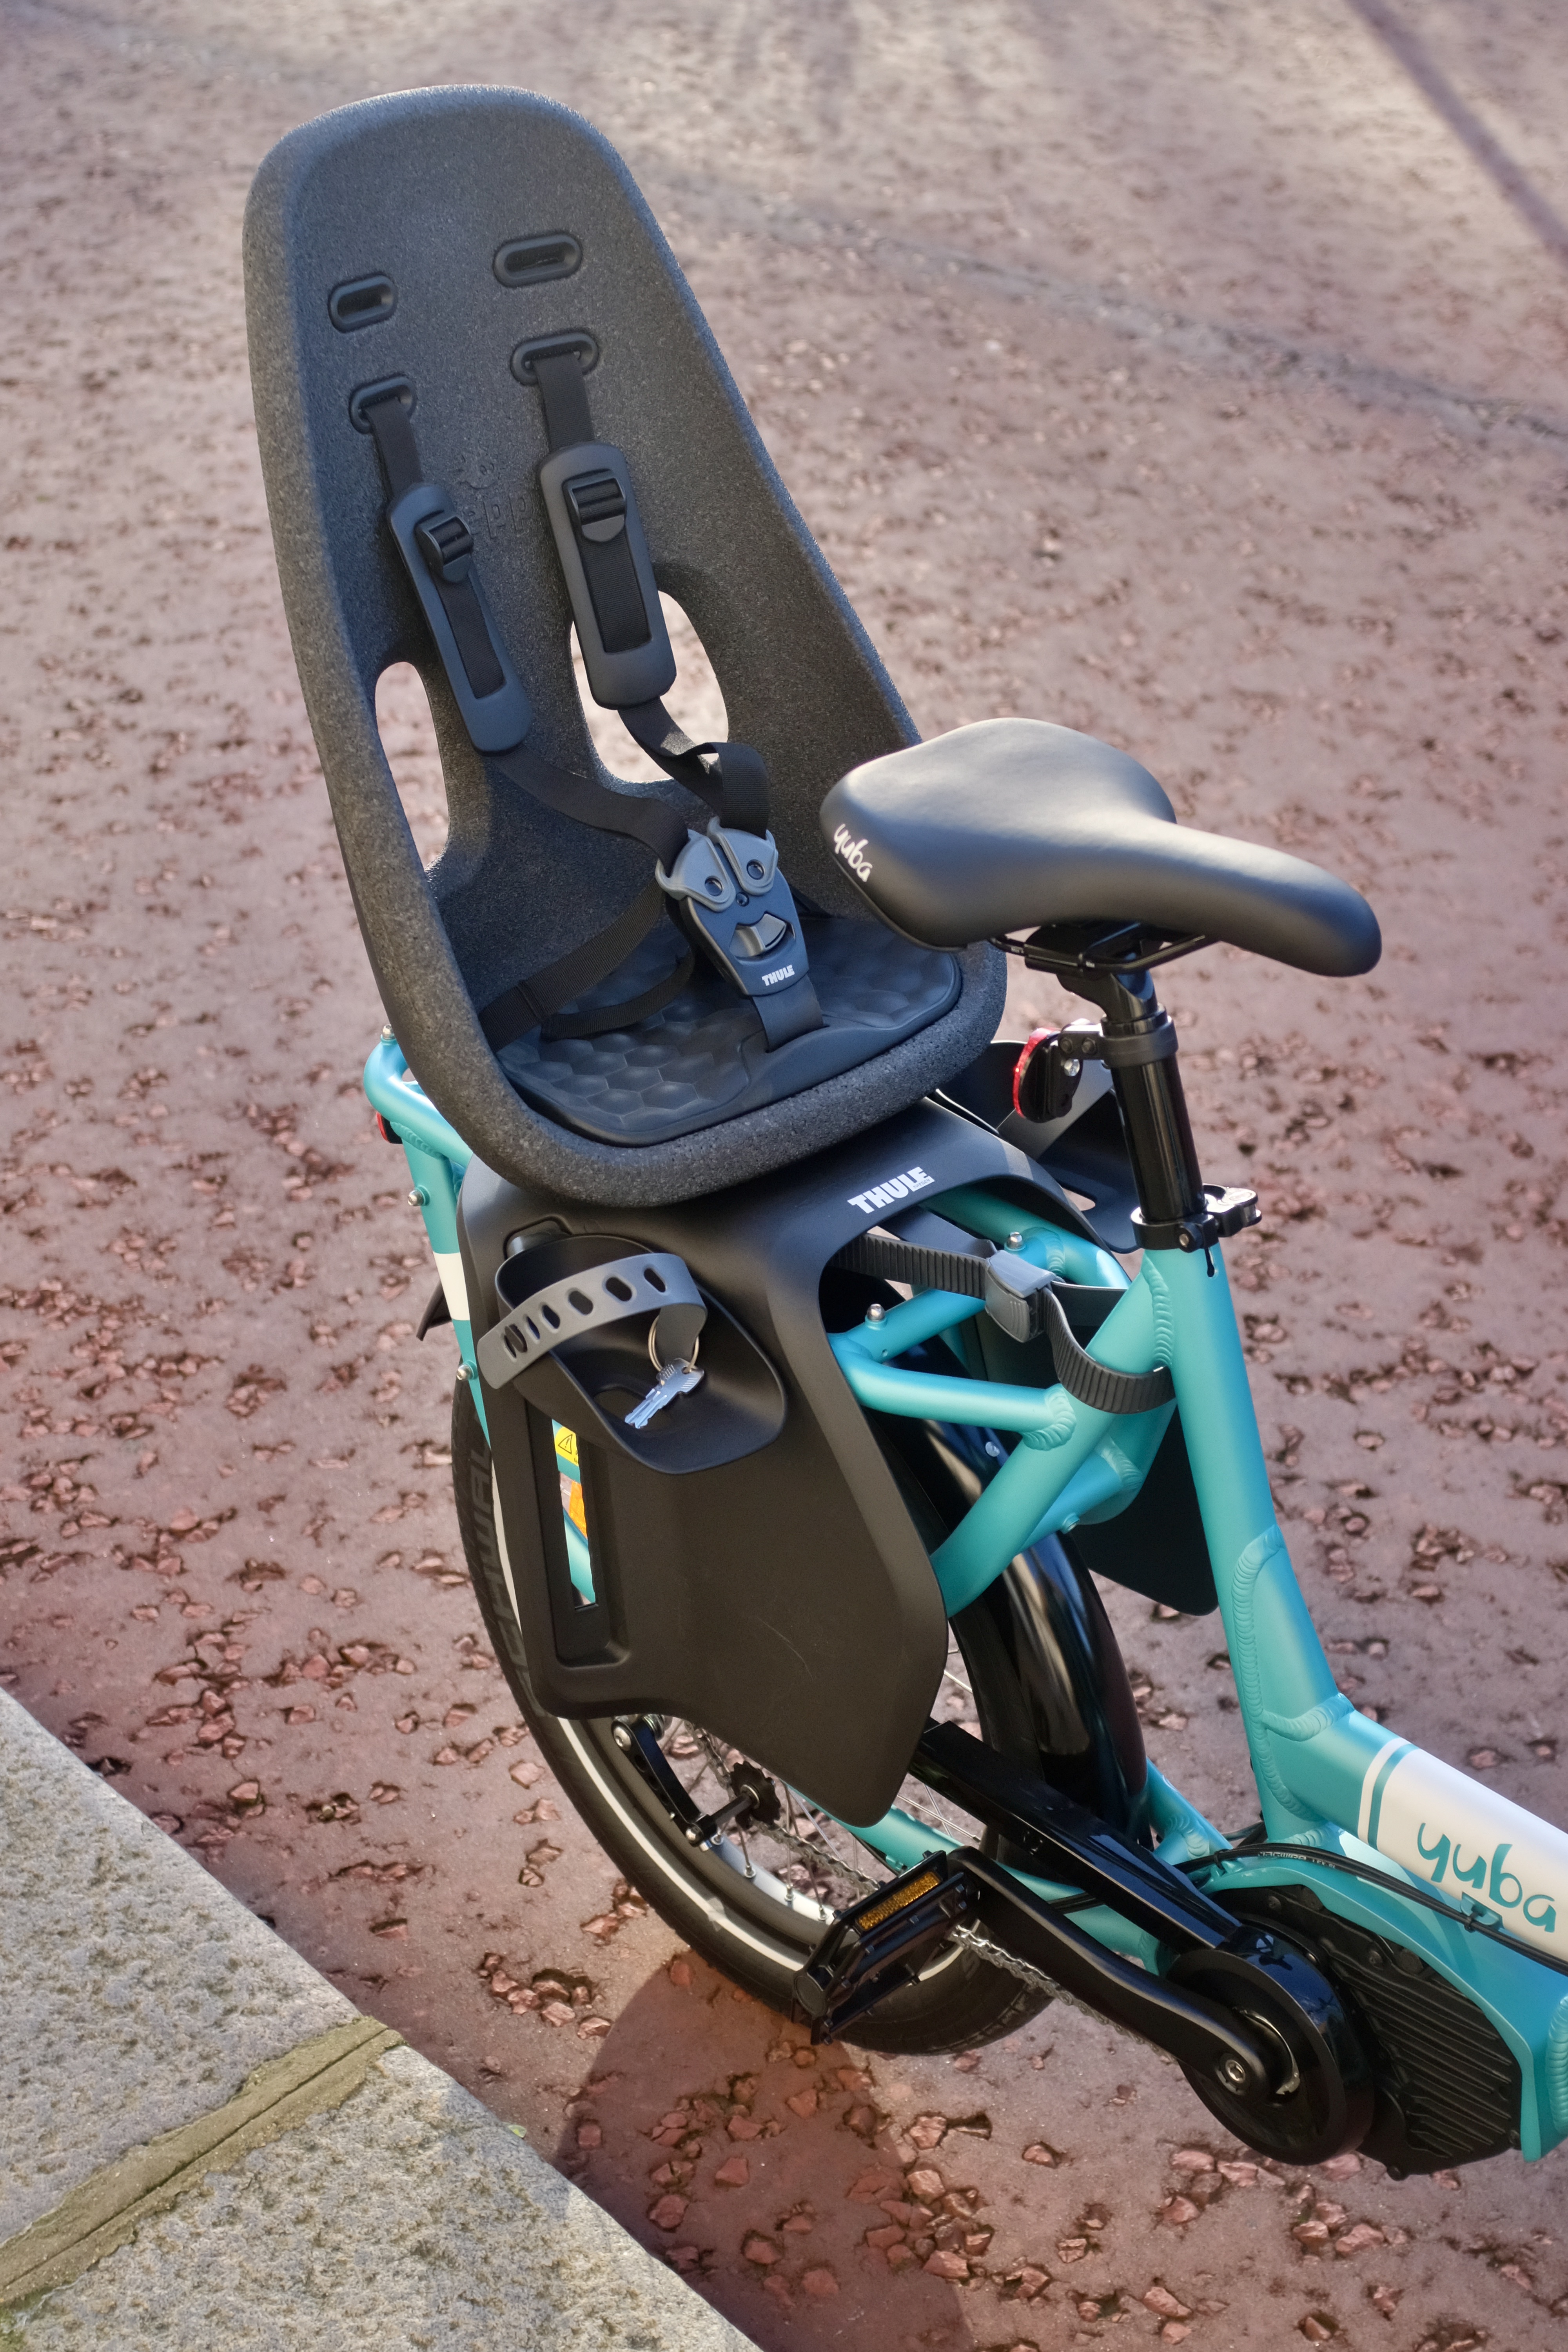 londongreencycles-yuba-supermarche-baby-seat